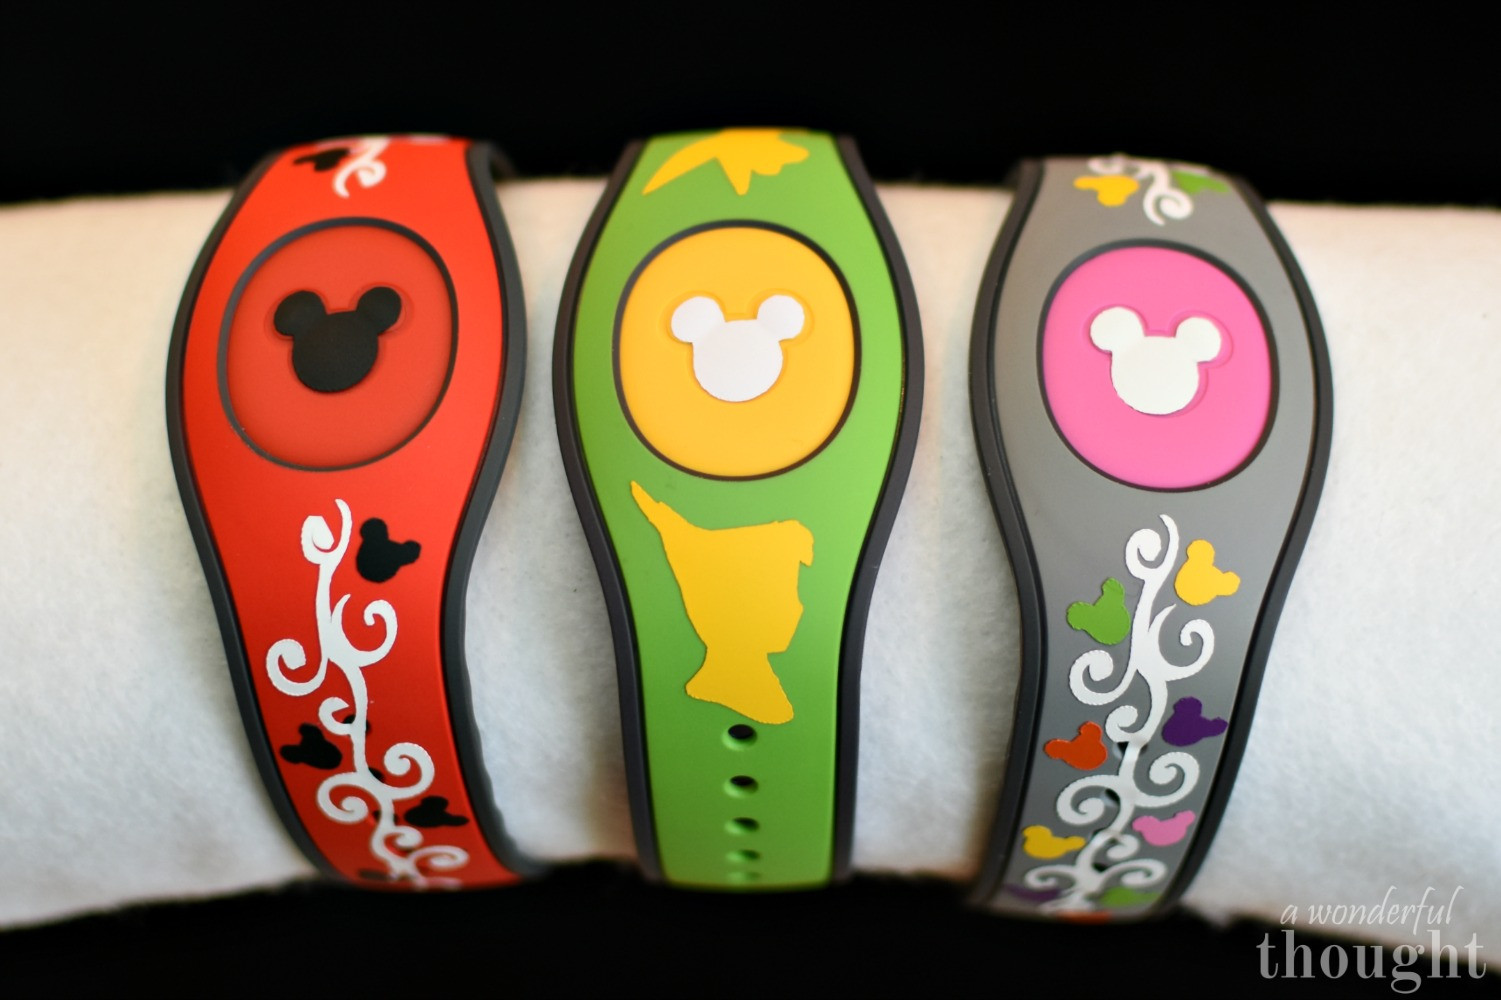 DIY Magic Band Decorations
 DIY Decorated MagicBands A Wonderful Thought